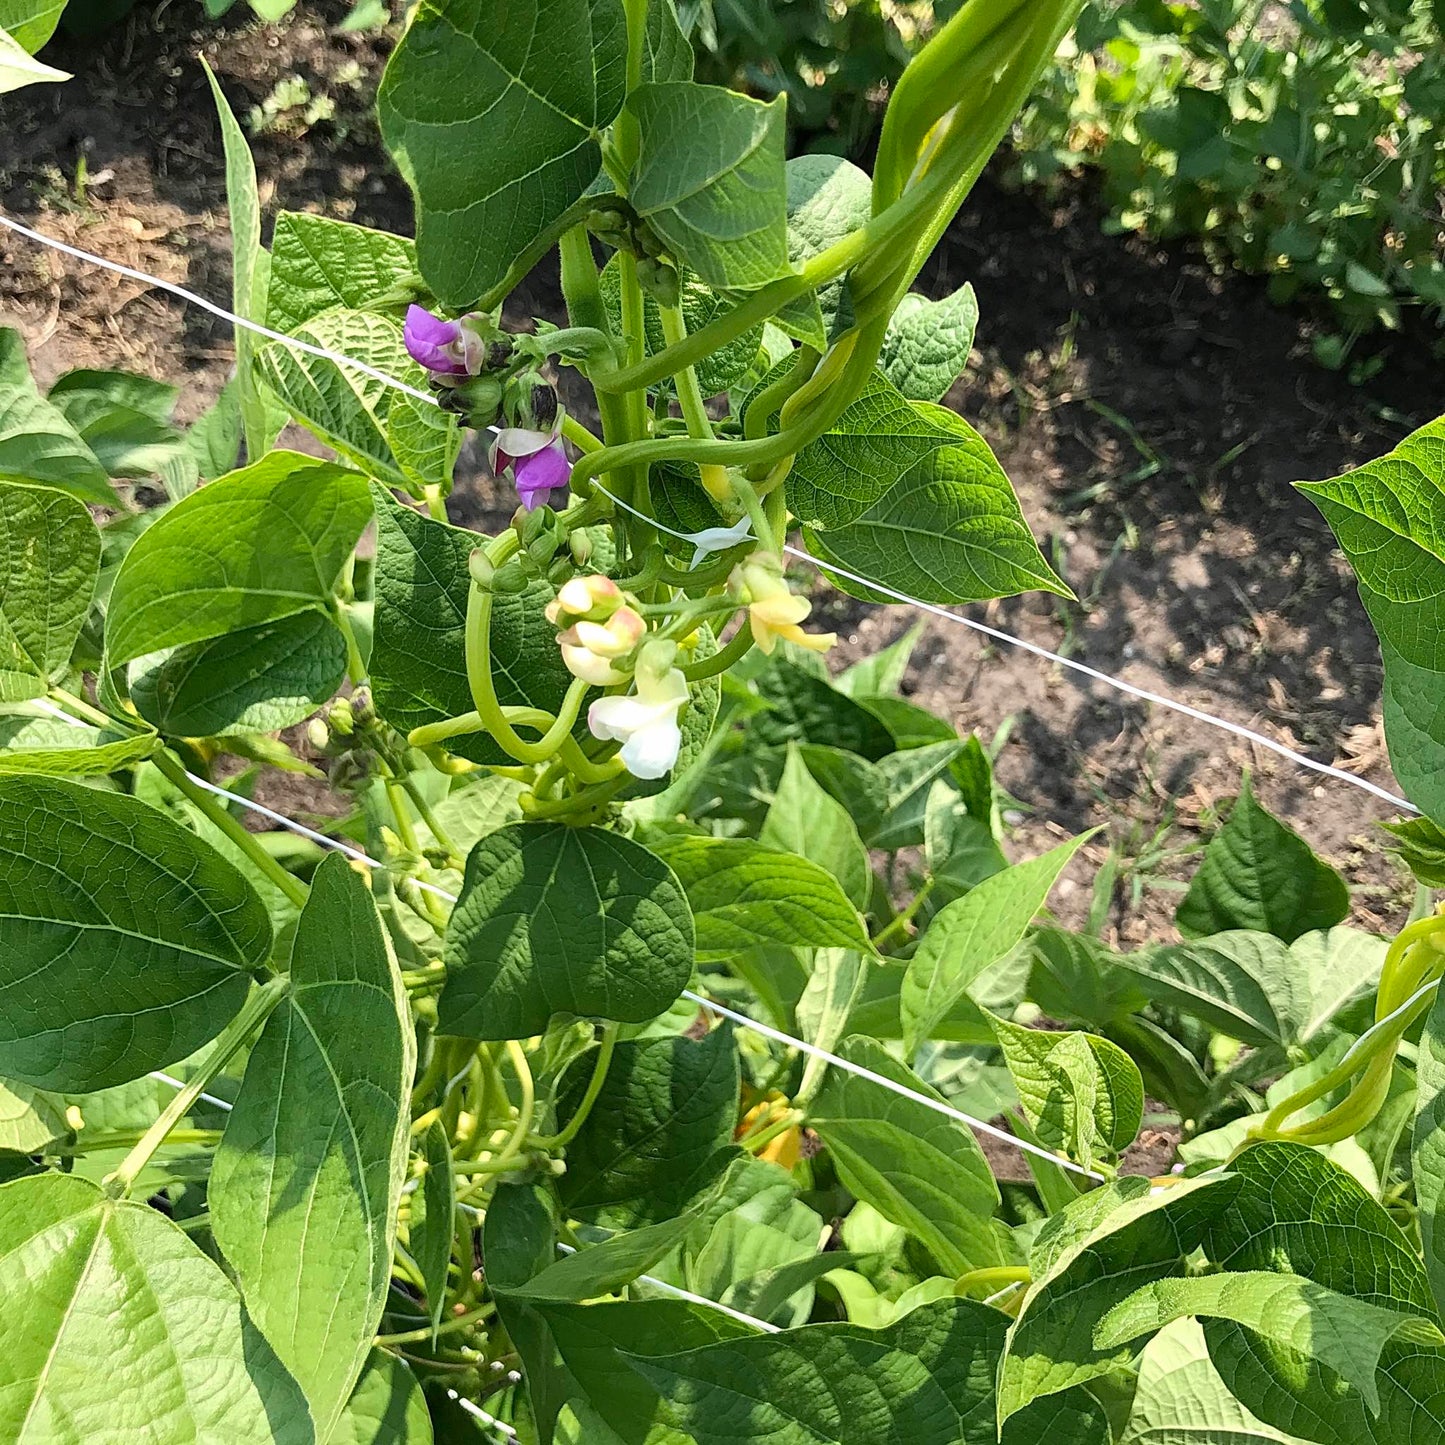 White and purple flowers on a pole bean plant.